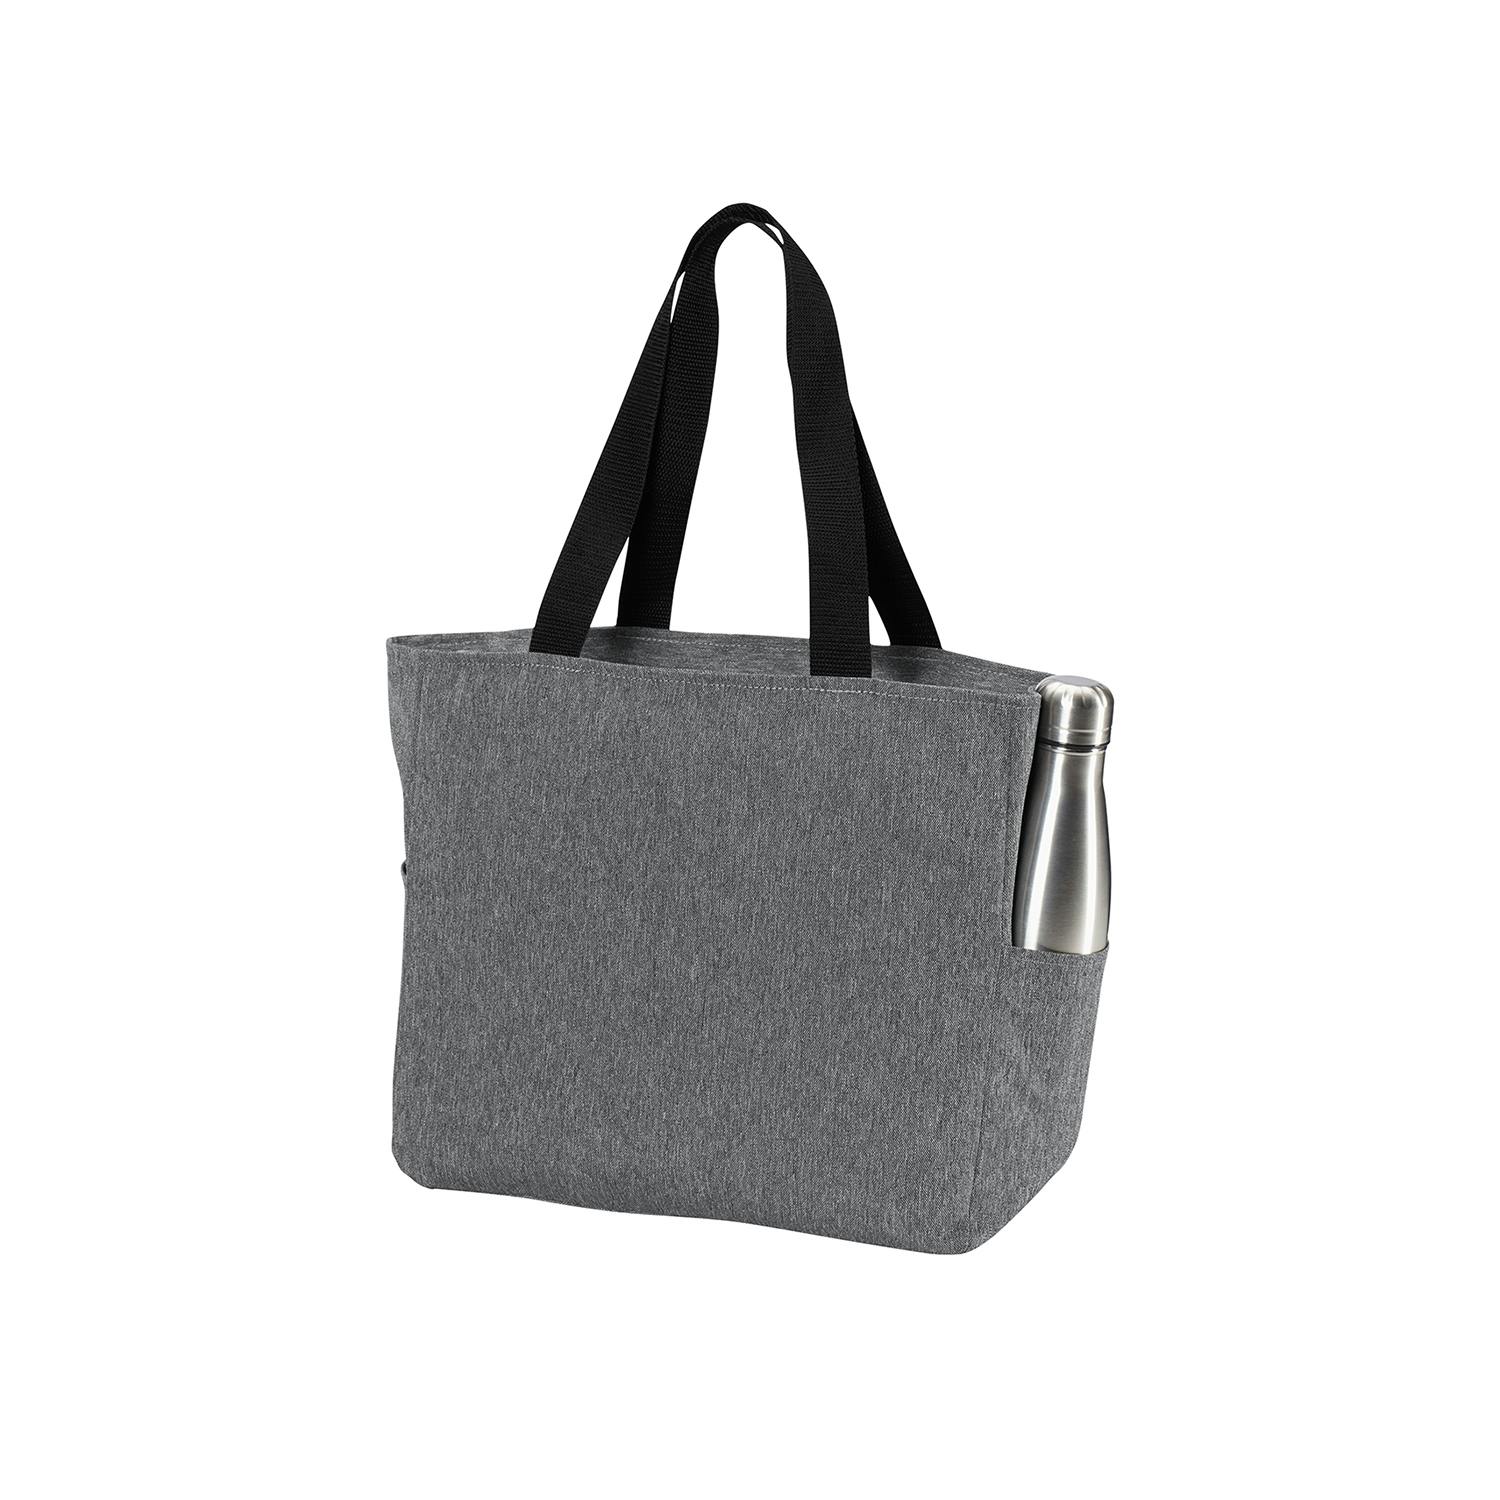 Port Authority Zip Tote Bag - additional Image 1